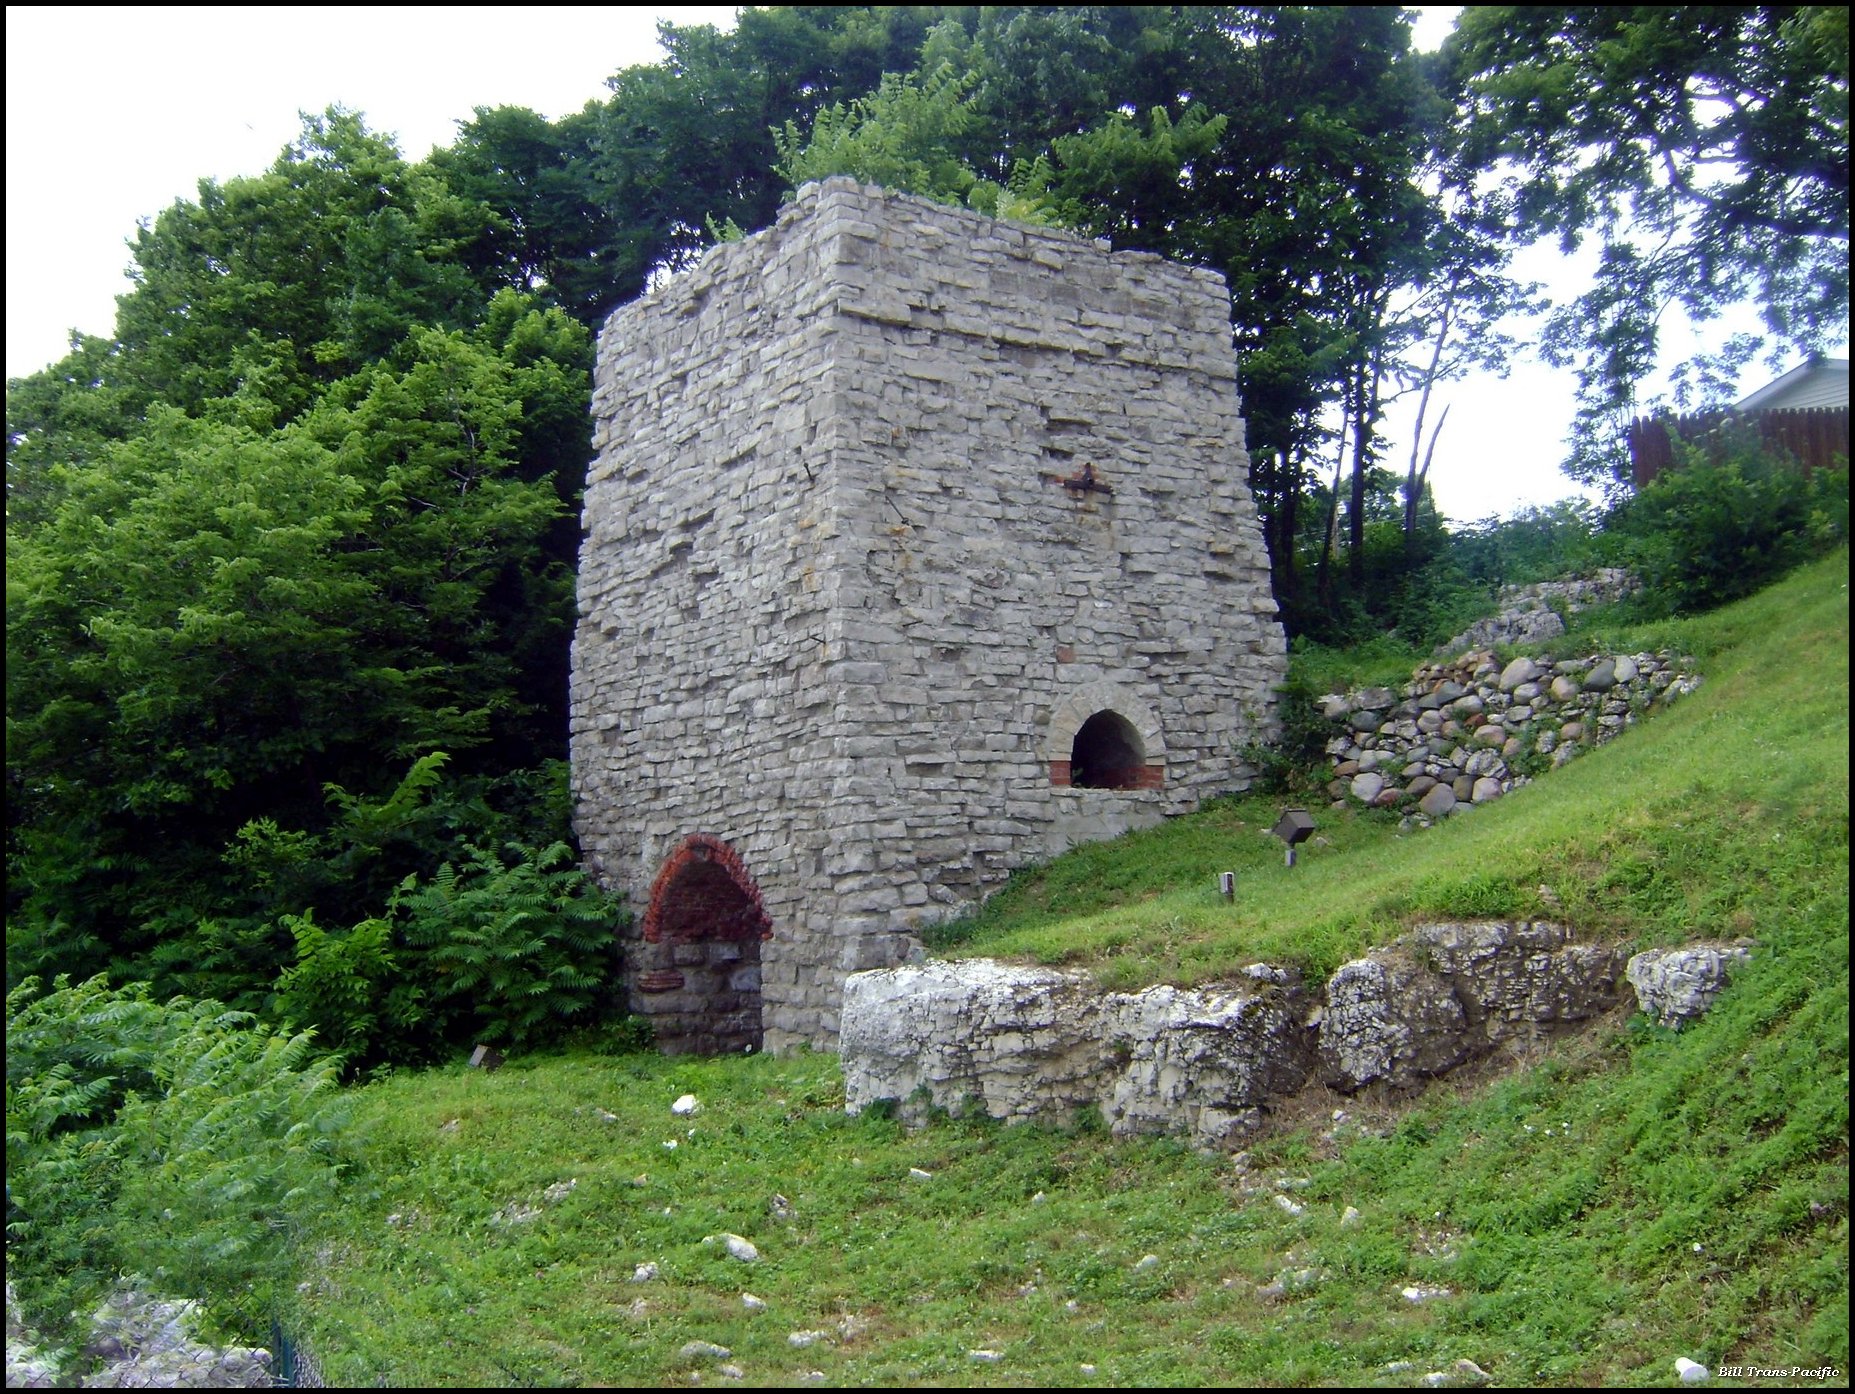 a large stone castle built into the side of a hill